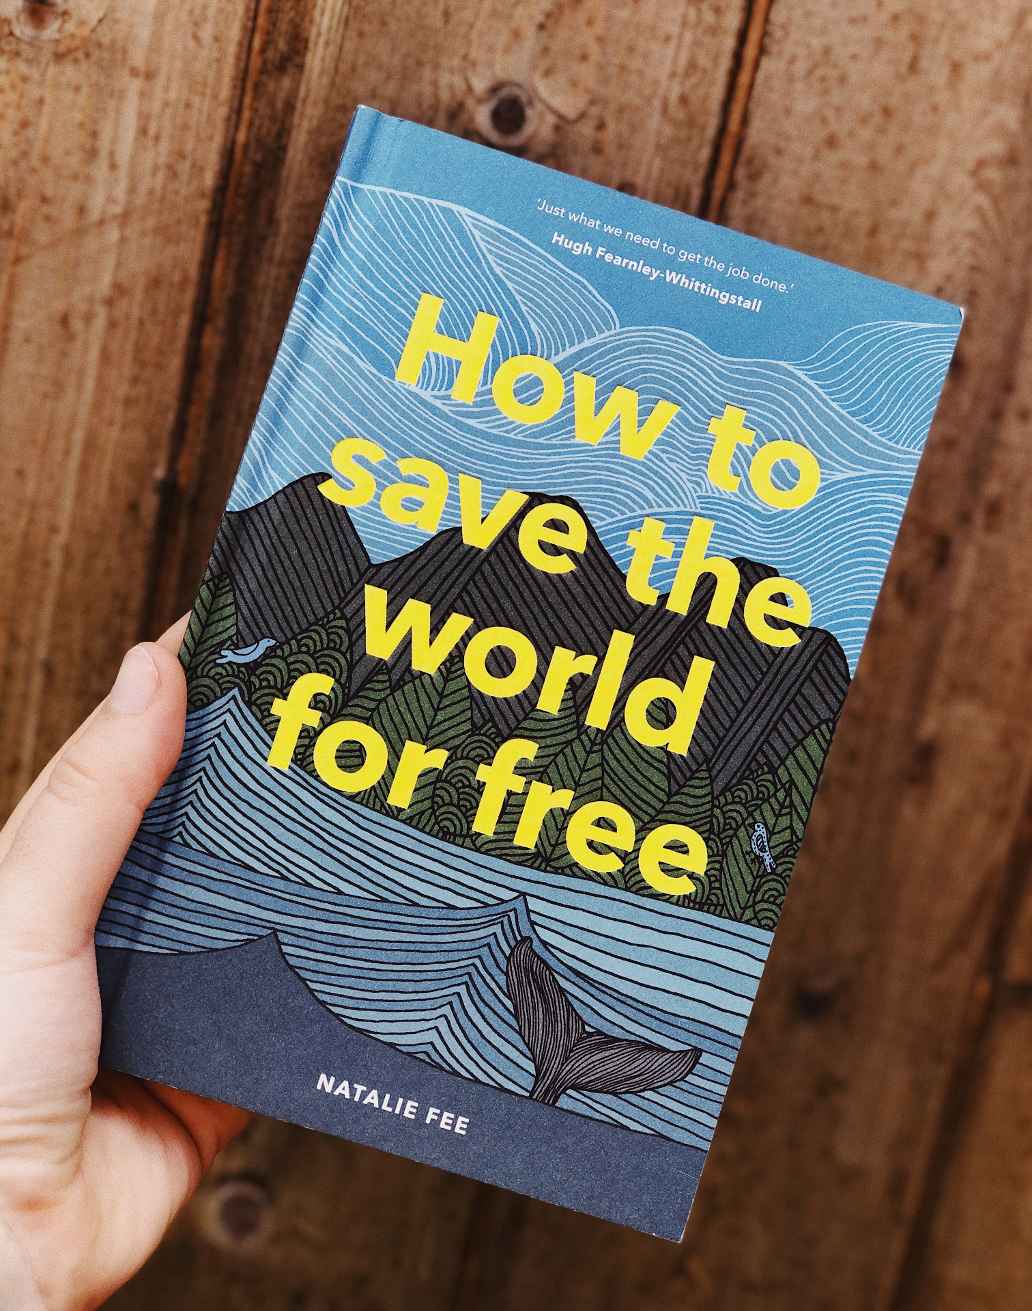 How to save the world for free, Natalie Fee